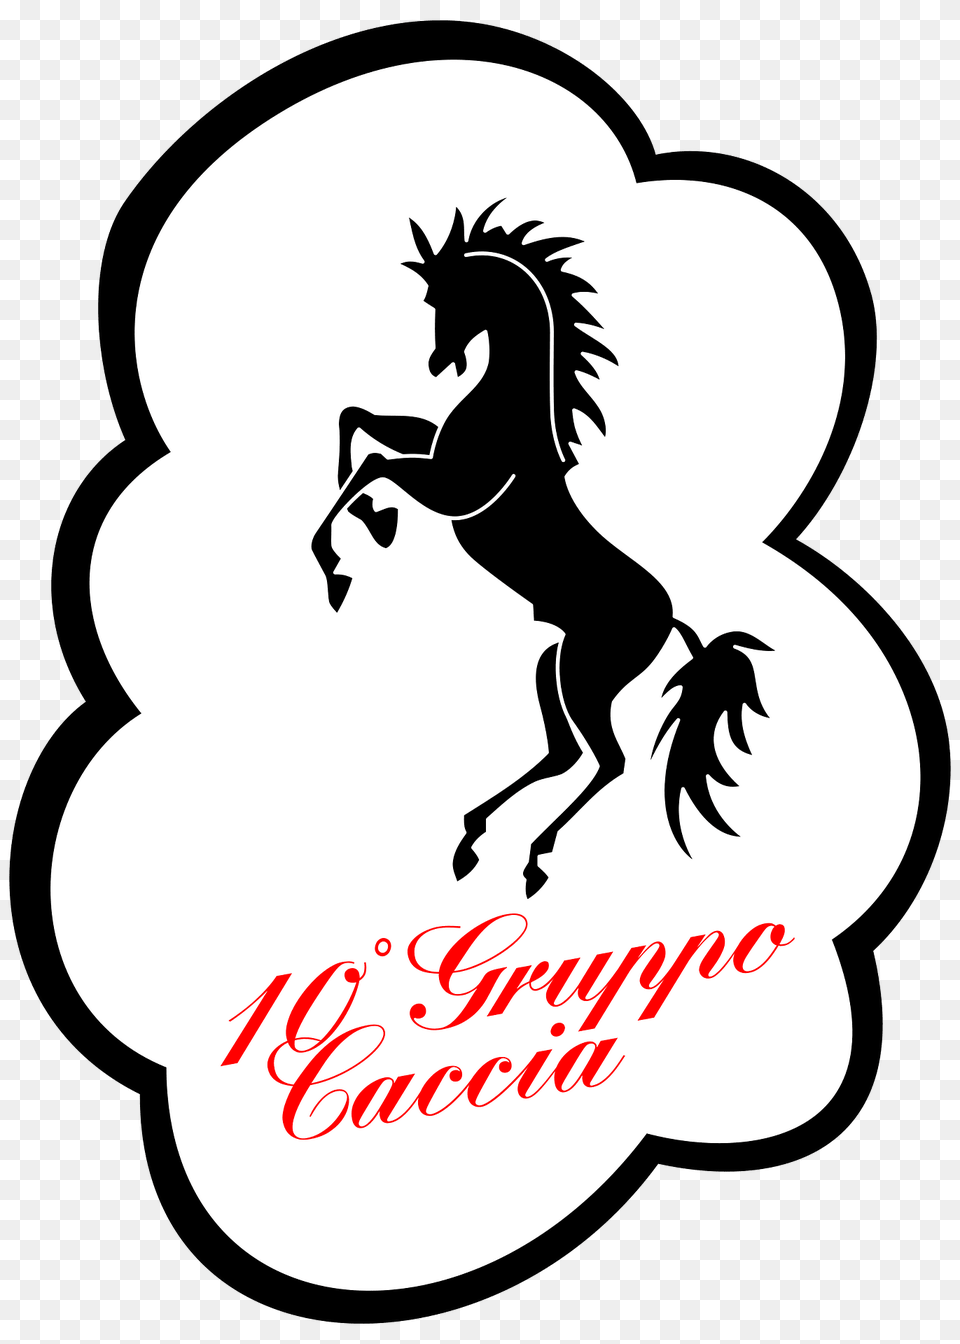 Ensign Of The 10 Gruppo Of The Italian Air Force Clipart, Silhouette, Stencil, Book, Publication Free Png